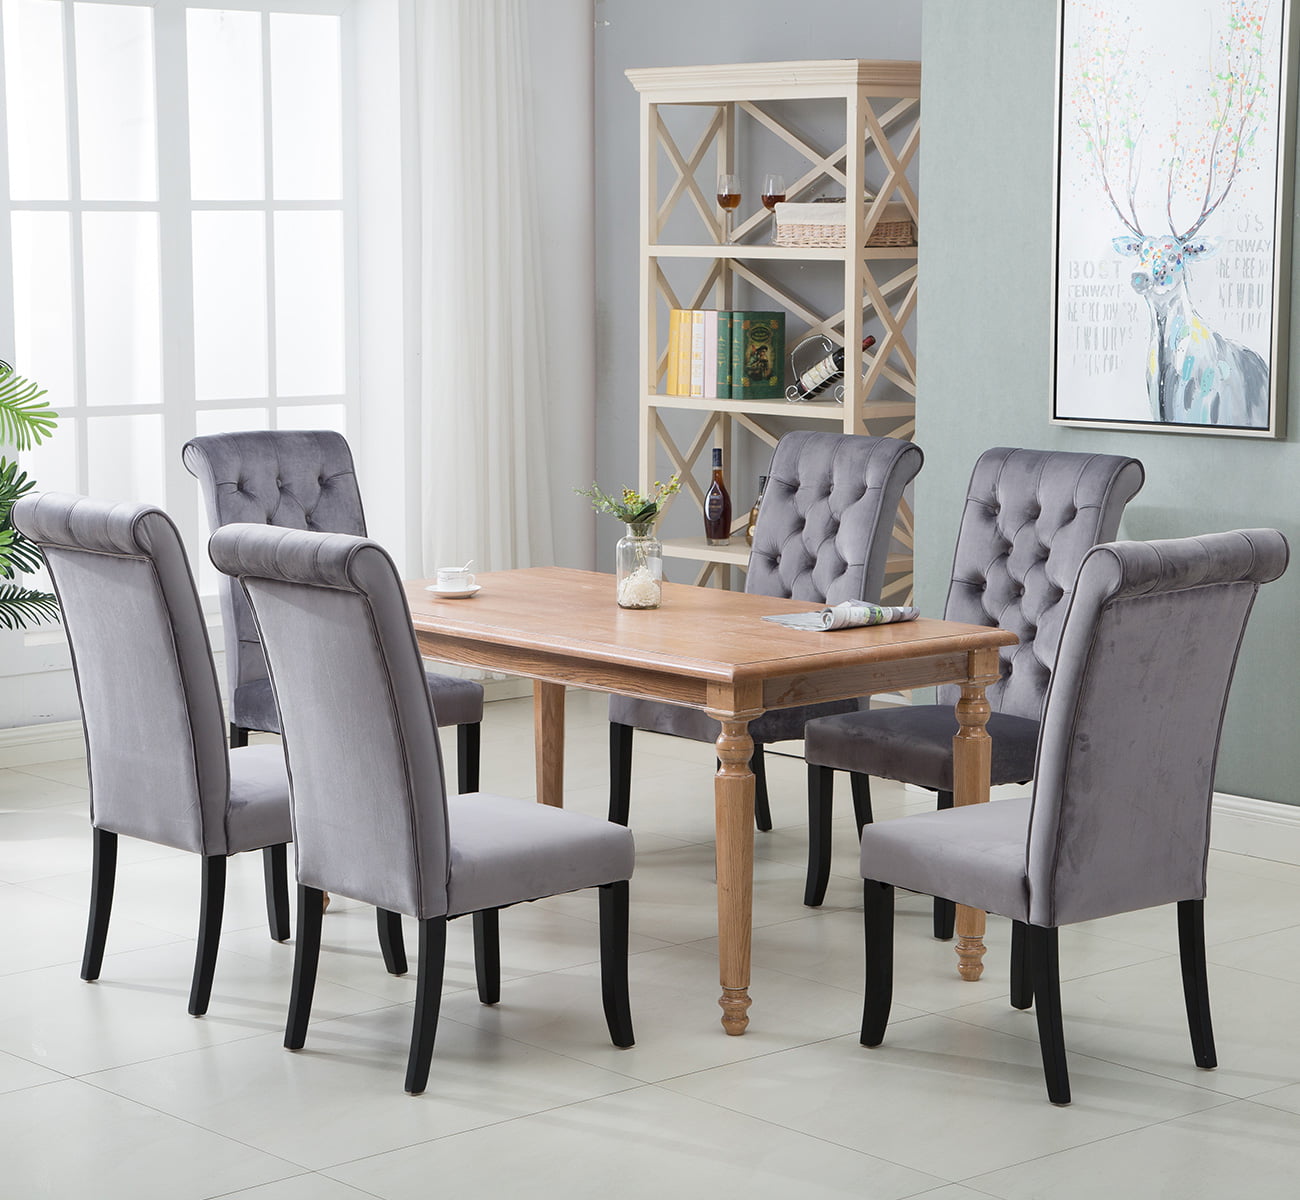 Classic Fabric Dining Side Chair, High Seat Dining Room Chairs